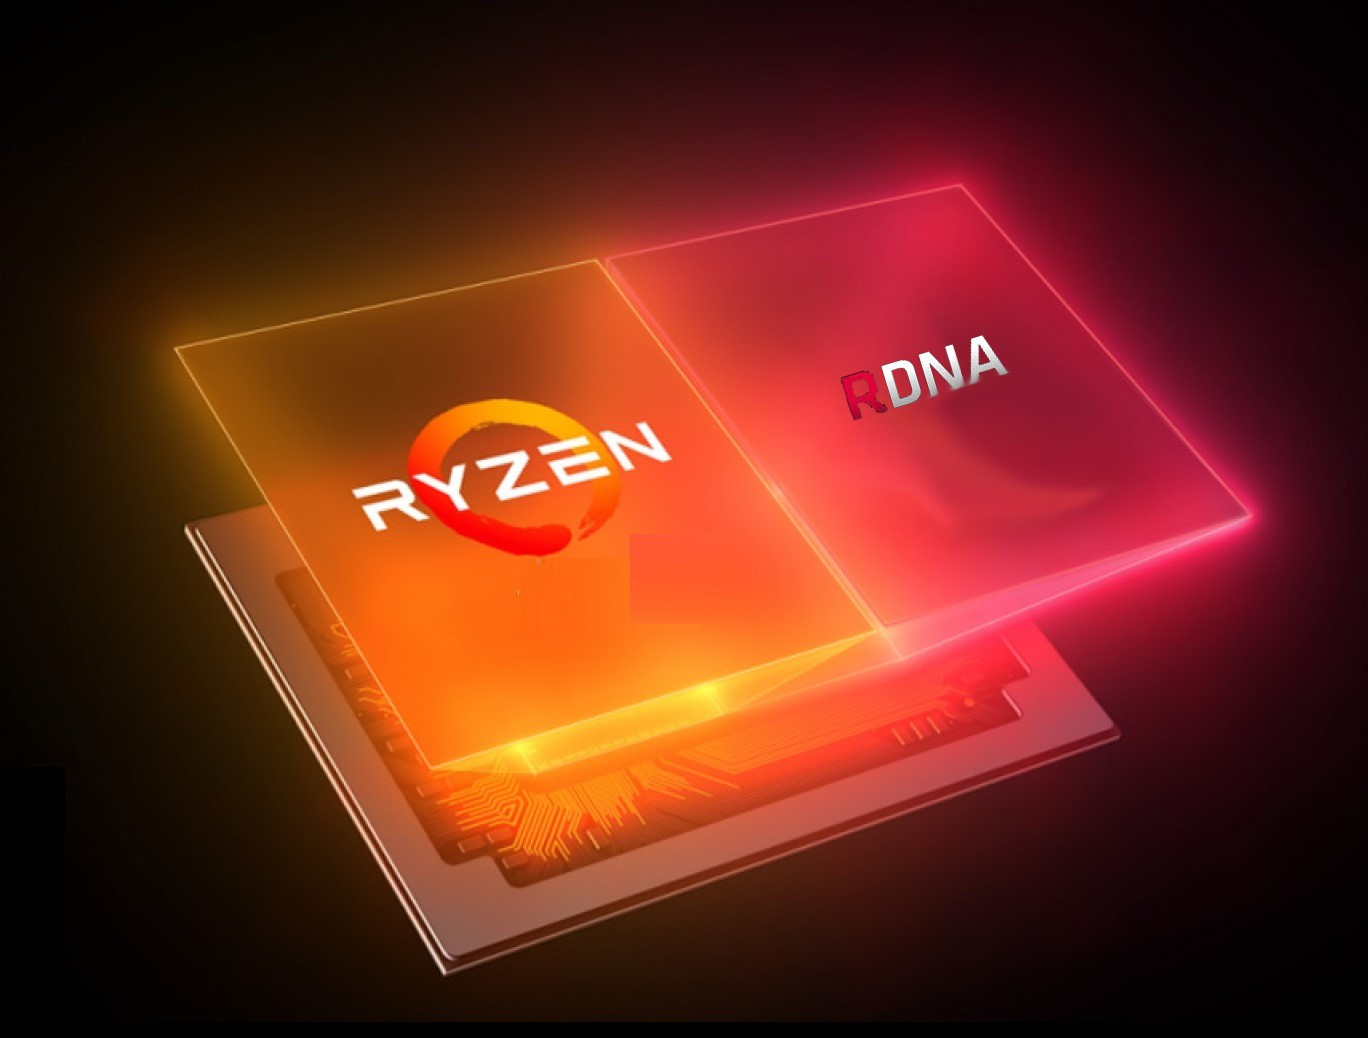 First mentions of AMD RDNA1 “Cyan Skillfish” iGPU for future Ryzen APUs appear in Linux code